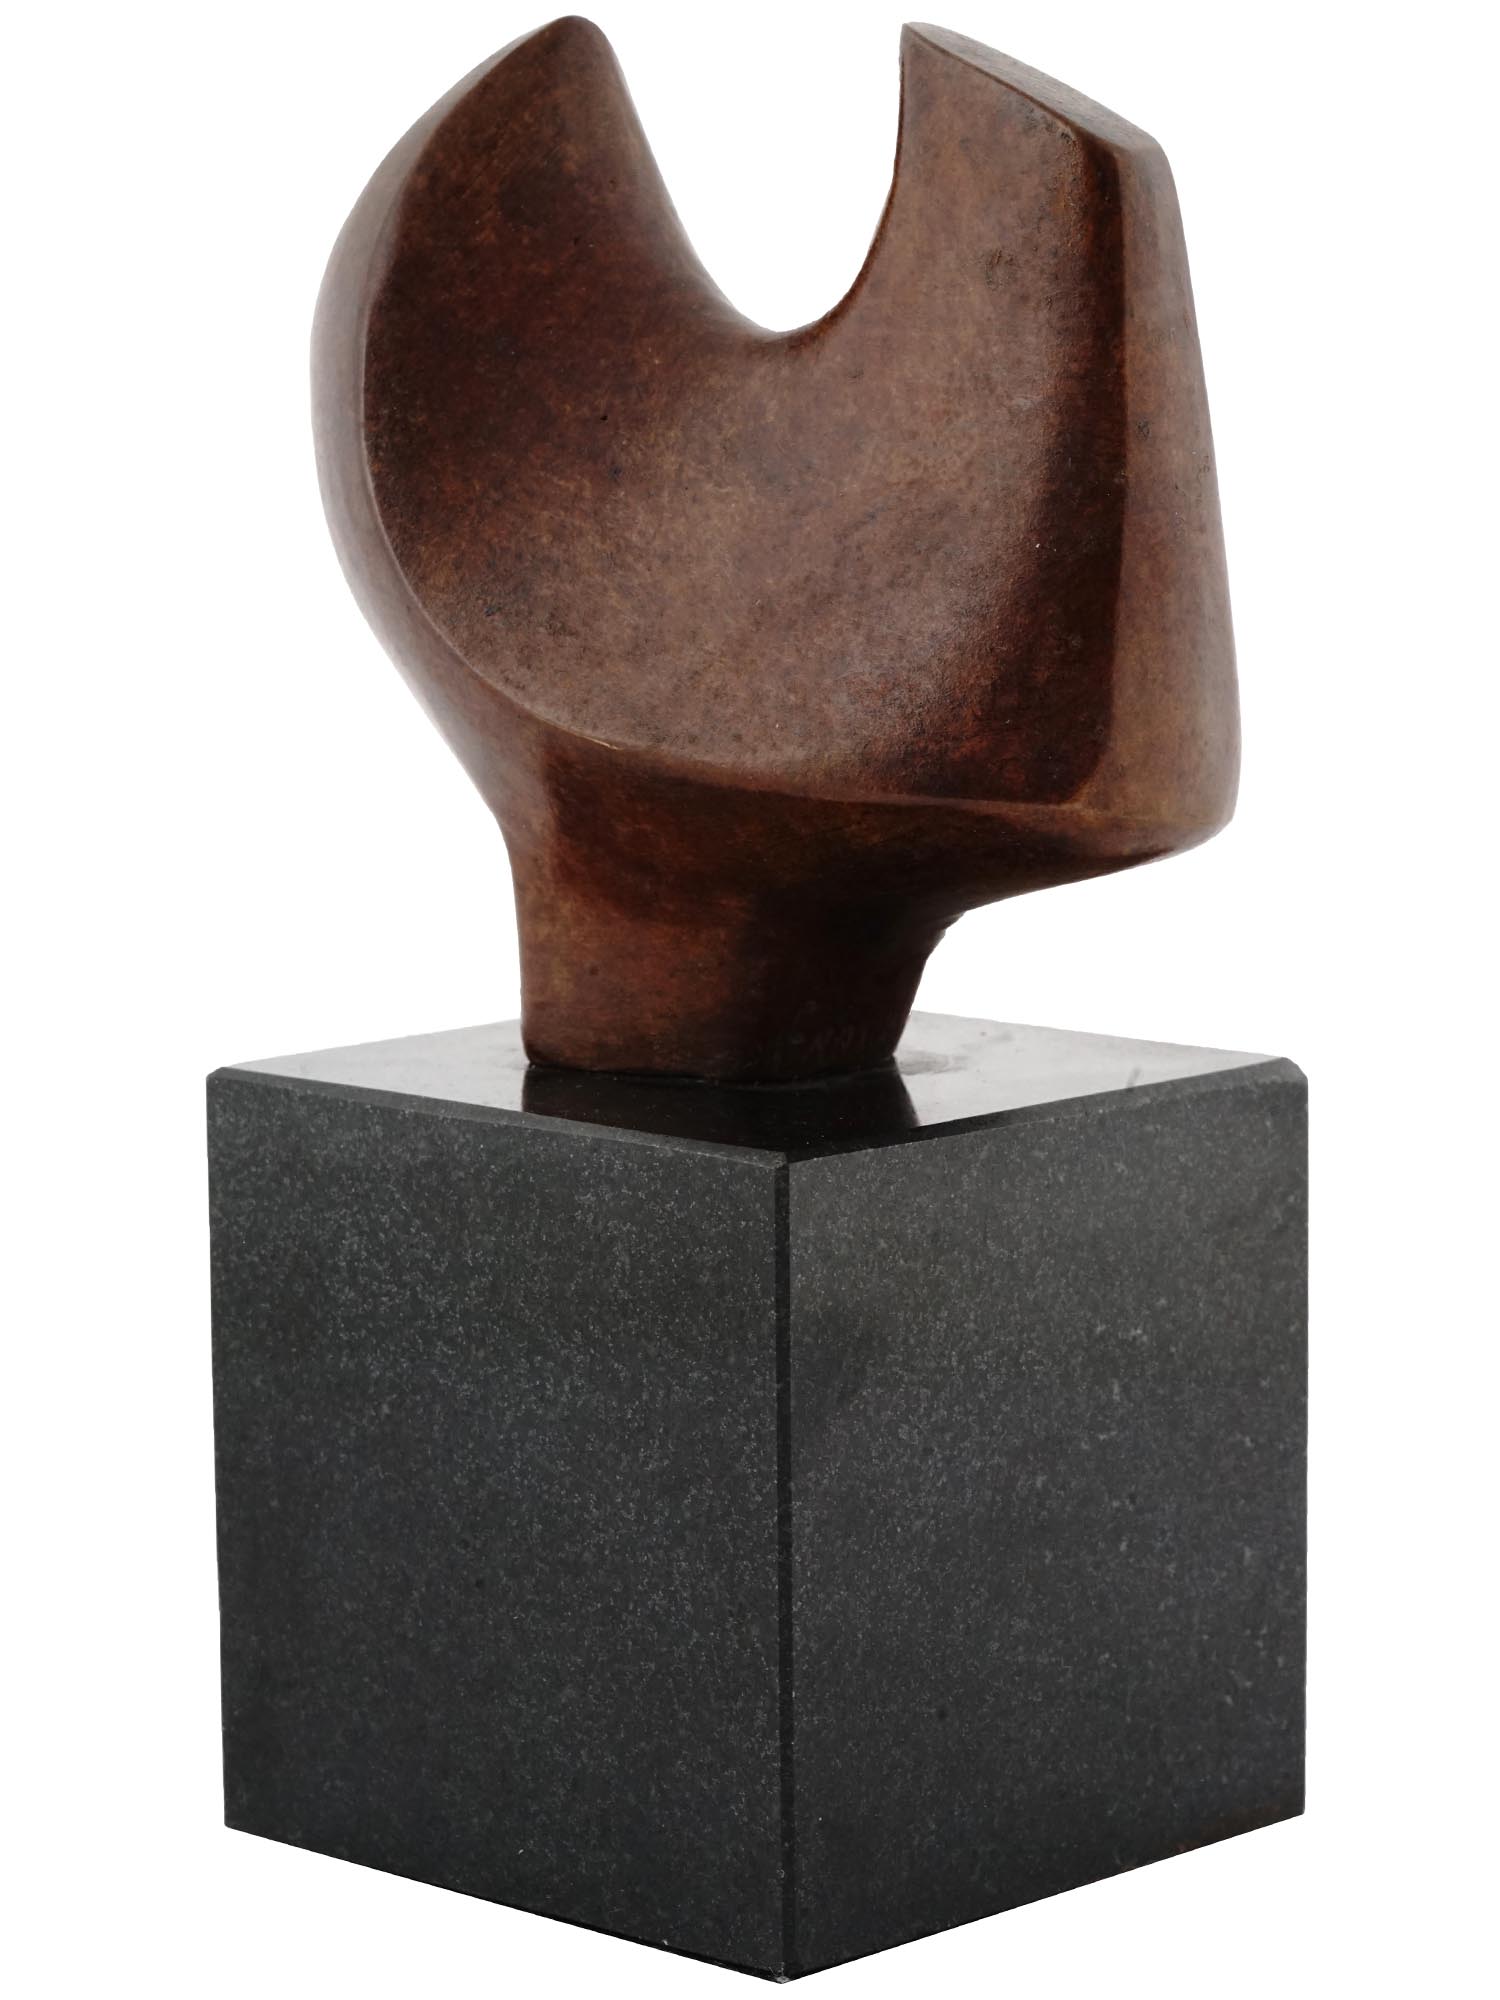 USA ABSTRACT BRONZE SCULPTURE BY GILBERT FRANKLIN PIC-2